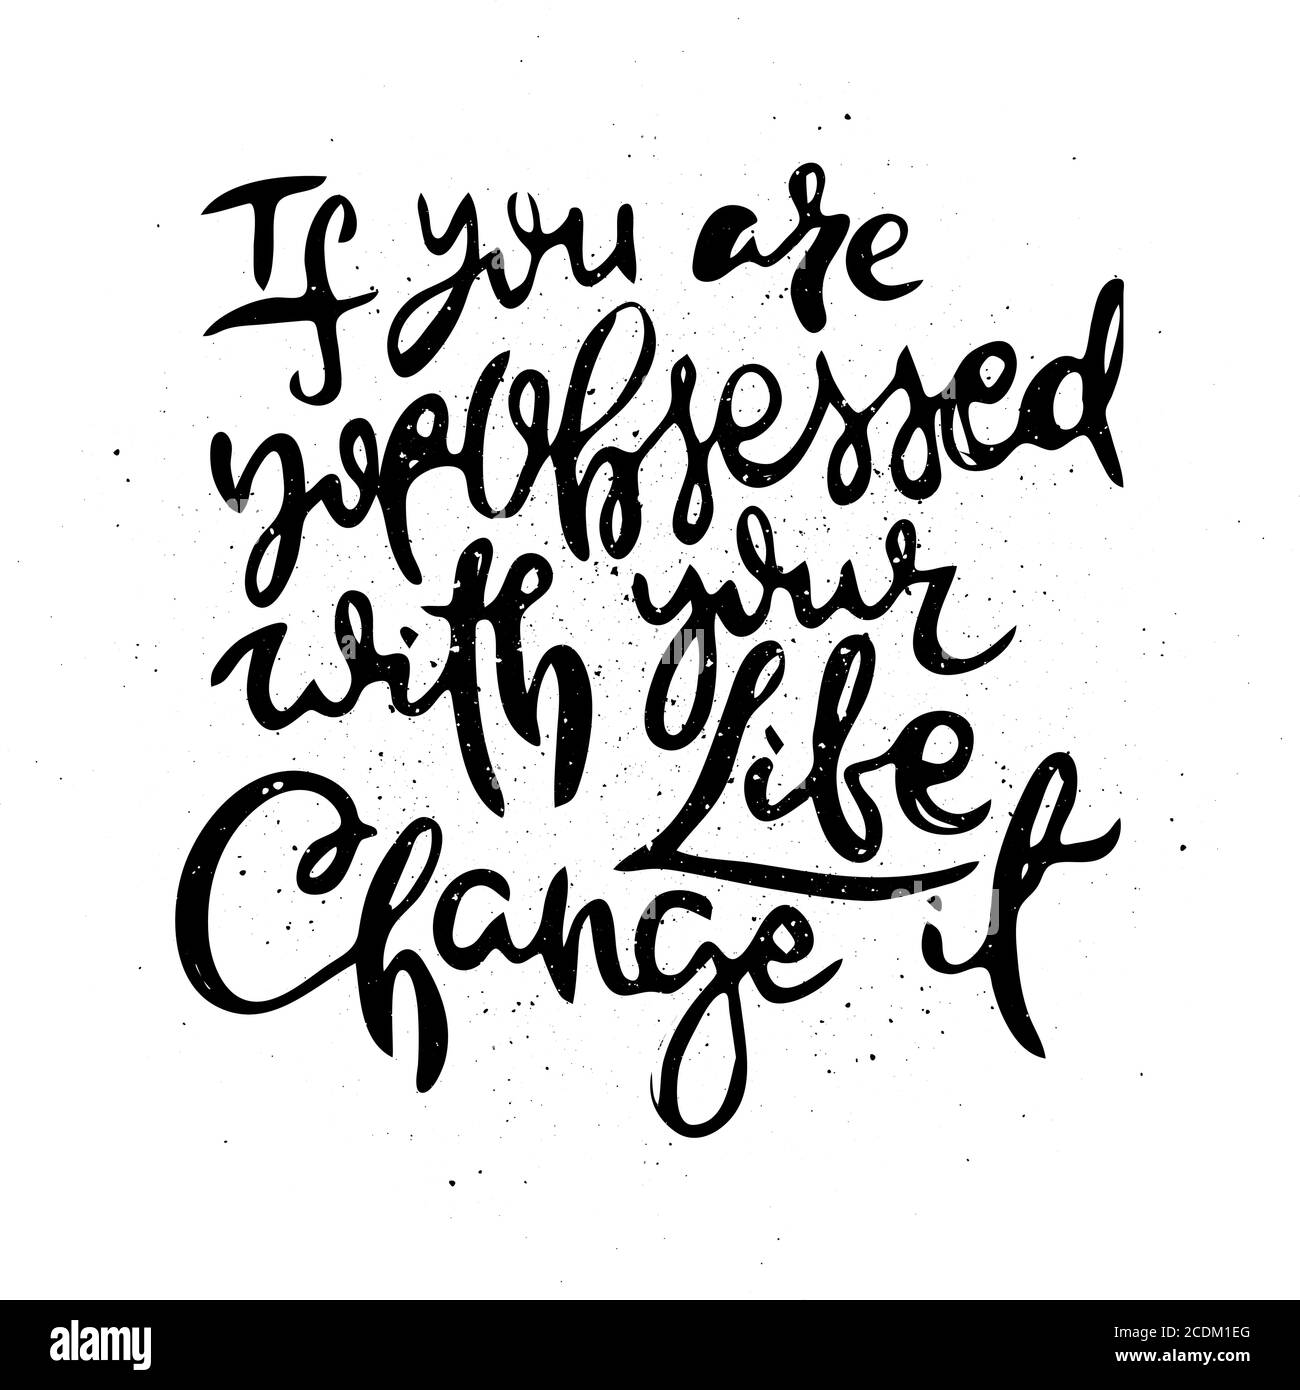 If You Are Not Obsessed With Your Life - Change It. Vector motivational phrase. Hand drawn ornate lettering. Hand drawn doodle print Stock Vector